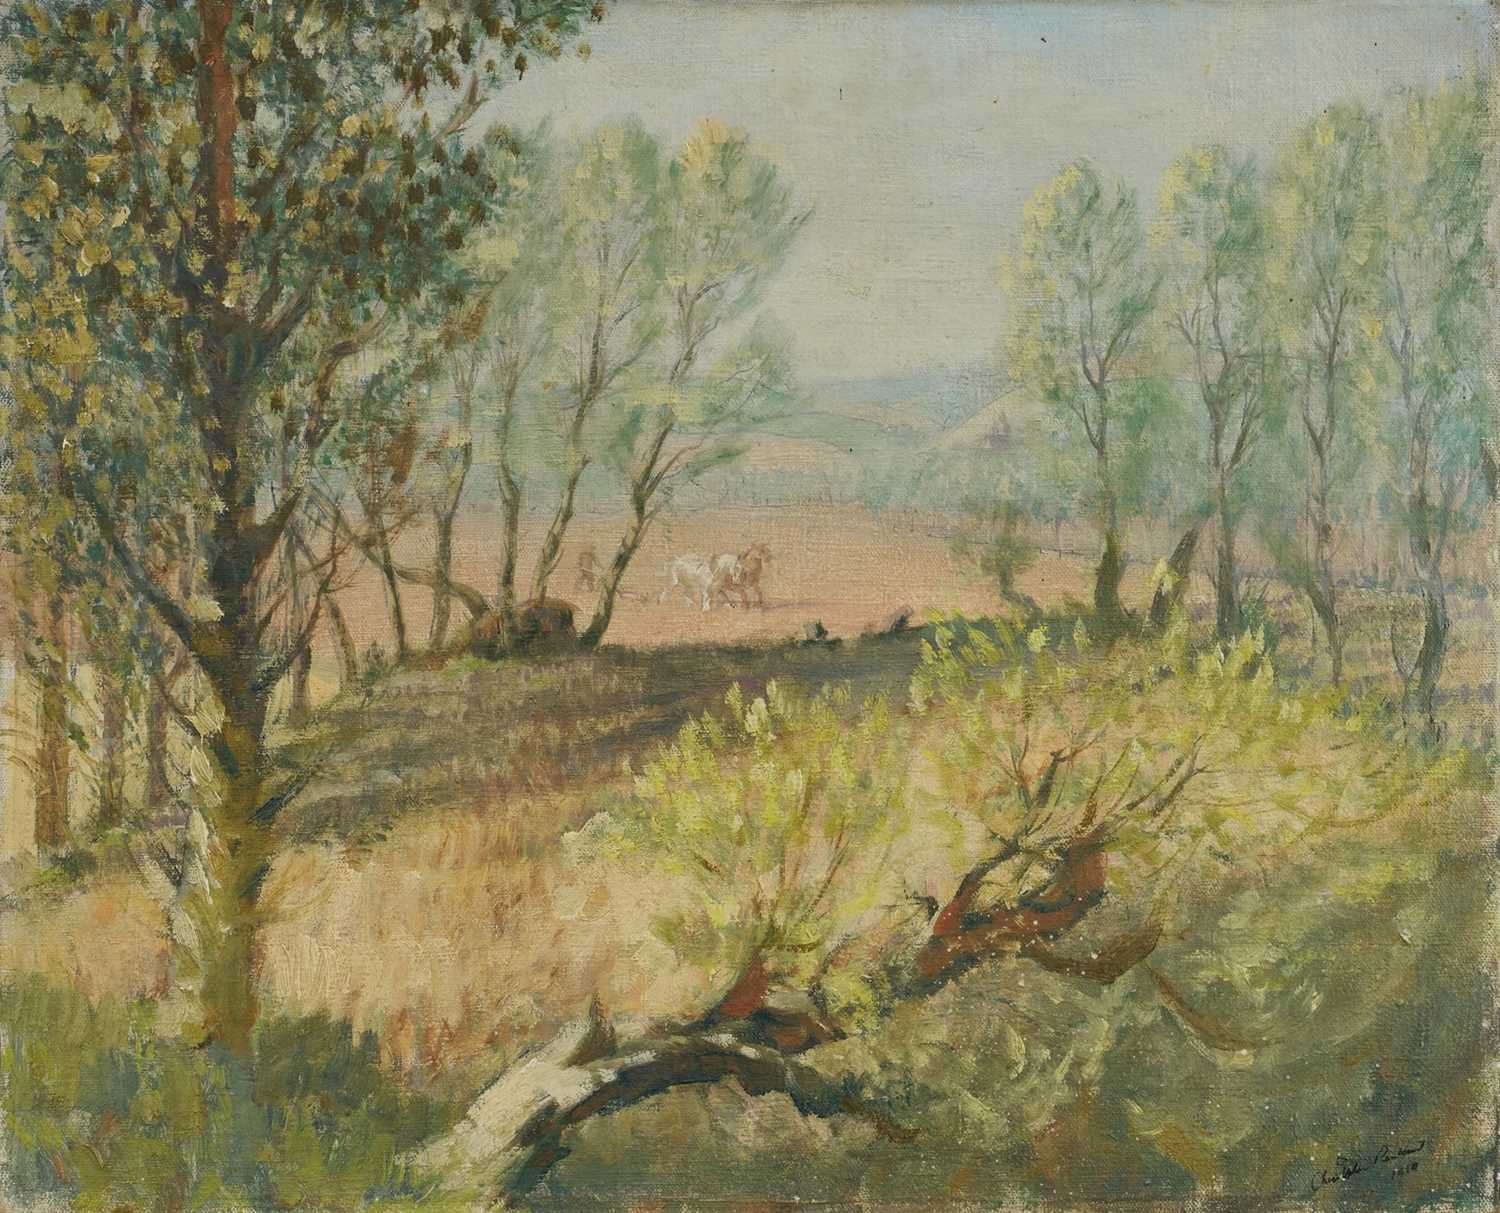 Wooded Landscape with Horses and Plough